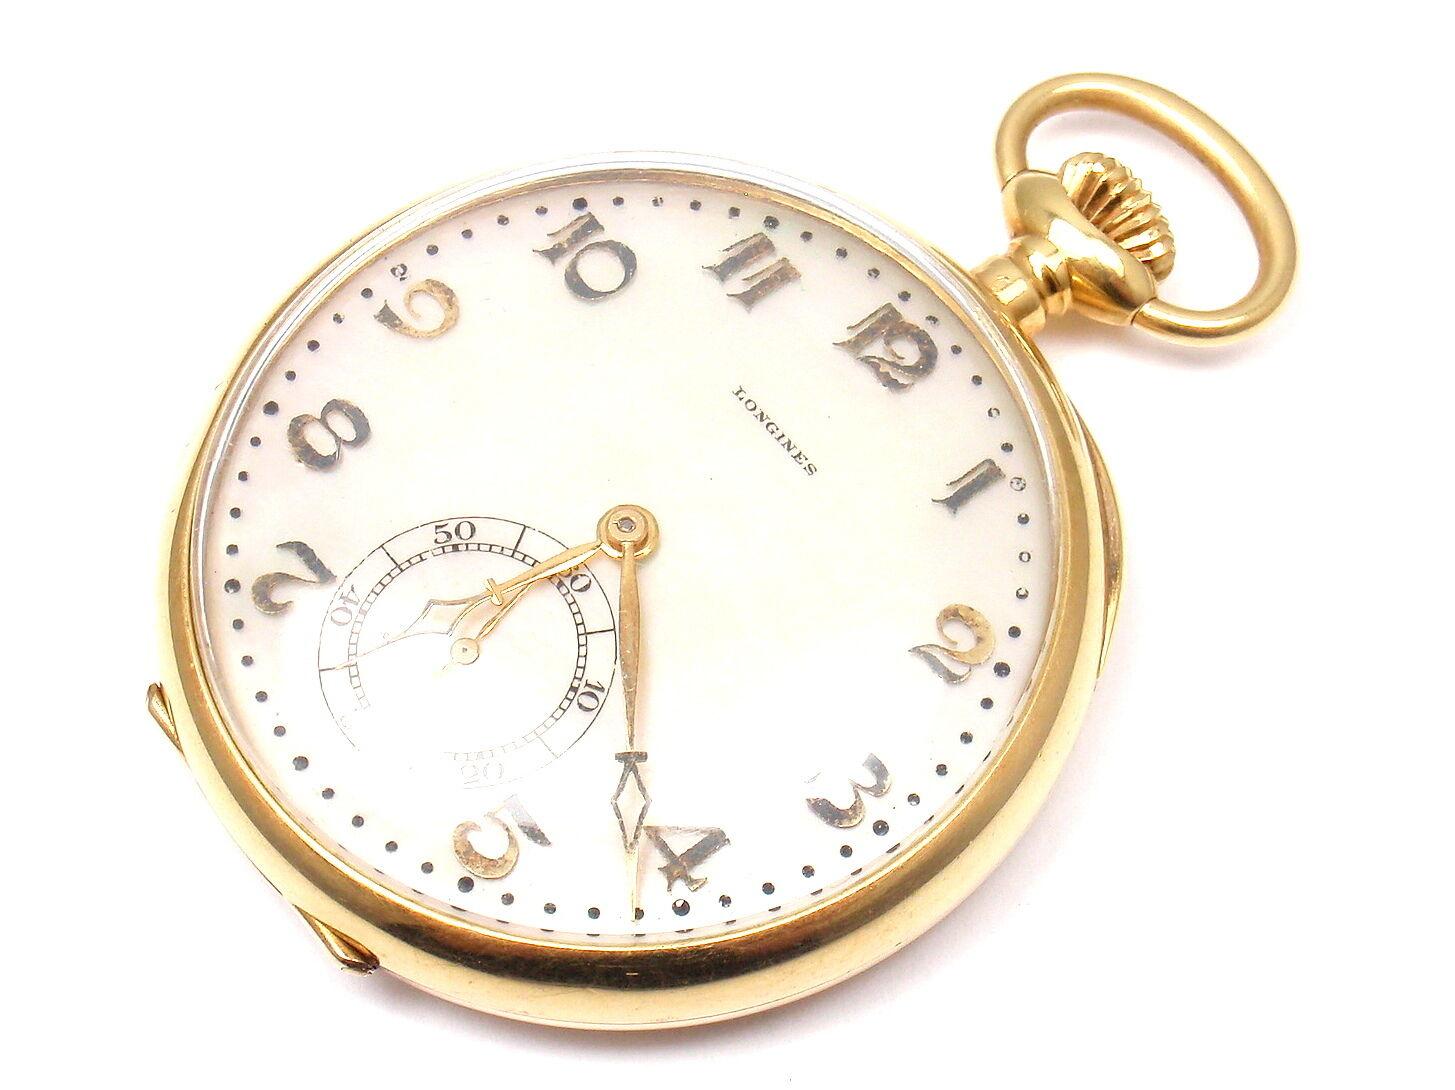 18k Yellow Gold 46mmPocket Watch by Longines. 
Details: 
Case Size: 46mm
Weight: 61.2 grams
Movement: Mechanical Hand Winding
Stamped Hallmarks: Longines 
Inside:  Longines A668230
*Free Shipping within the United States*
Your Price: $4,500
Ti011merd